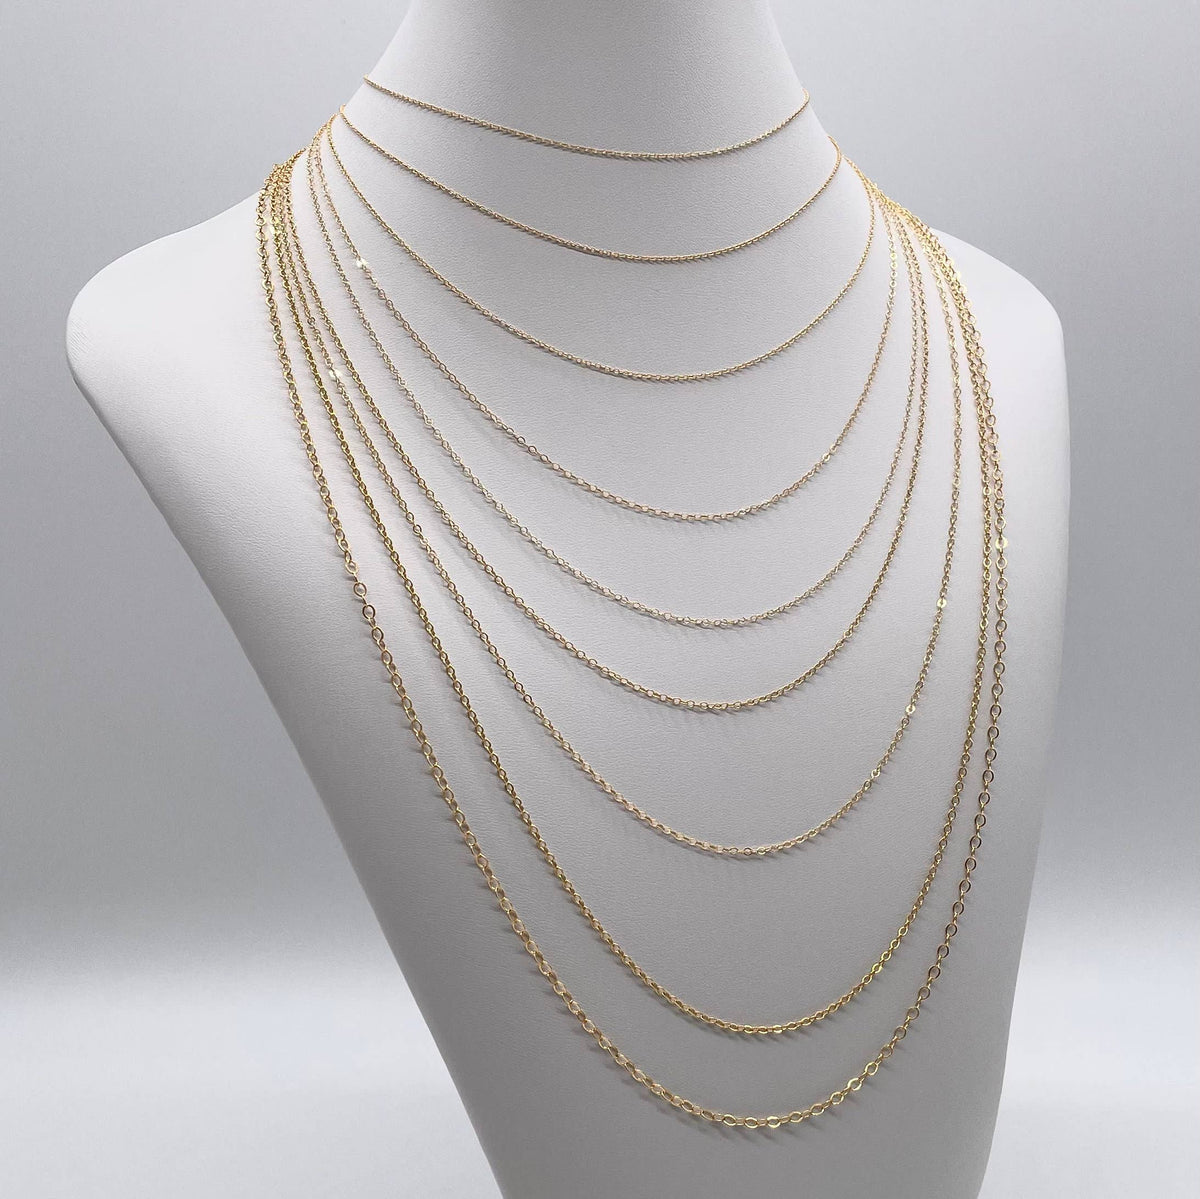 9 Styles Any Length 14K Gold Filled Cable Necklaces: 18 / 1.2mm Round (1025)